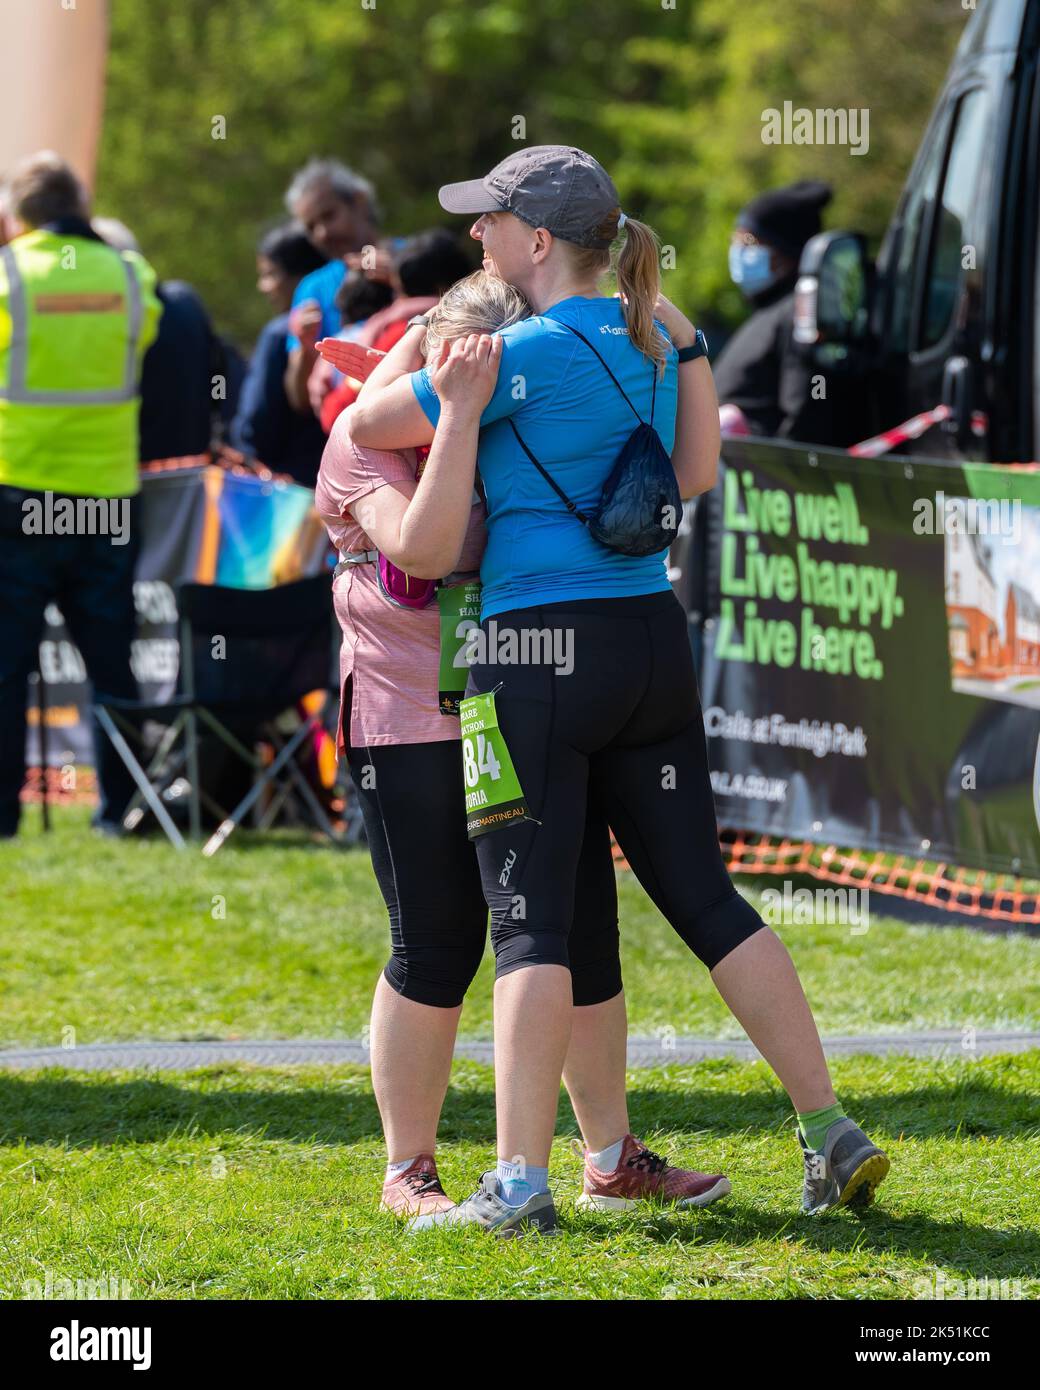 Shakespeare Marathon and half Marathon. Two women runners hugging in celebration of completing a race. Stock Photo